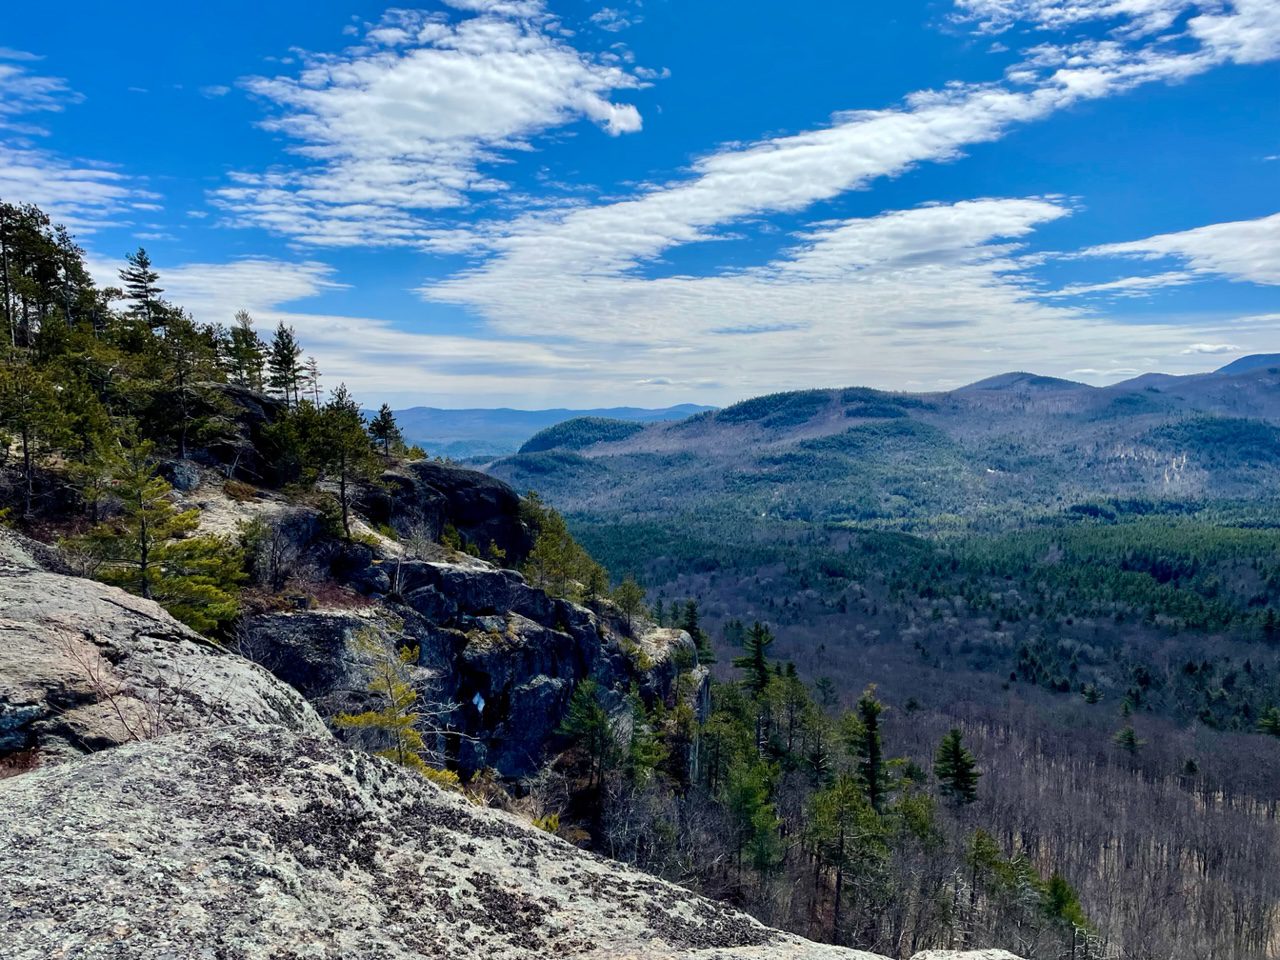 Open crags on the an overlook on the Blueberry trail system in Elizabethtown. Getting outdoors in the Adirondacks